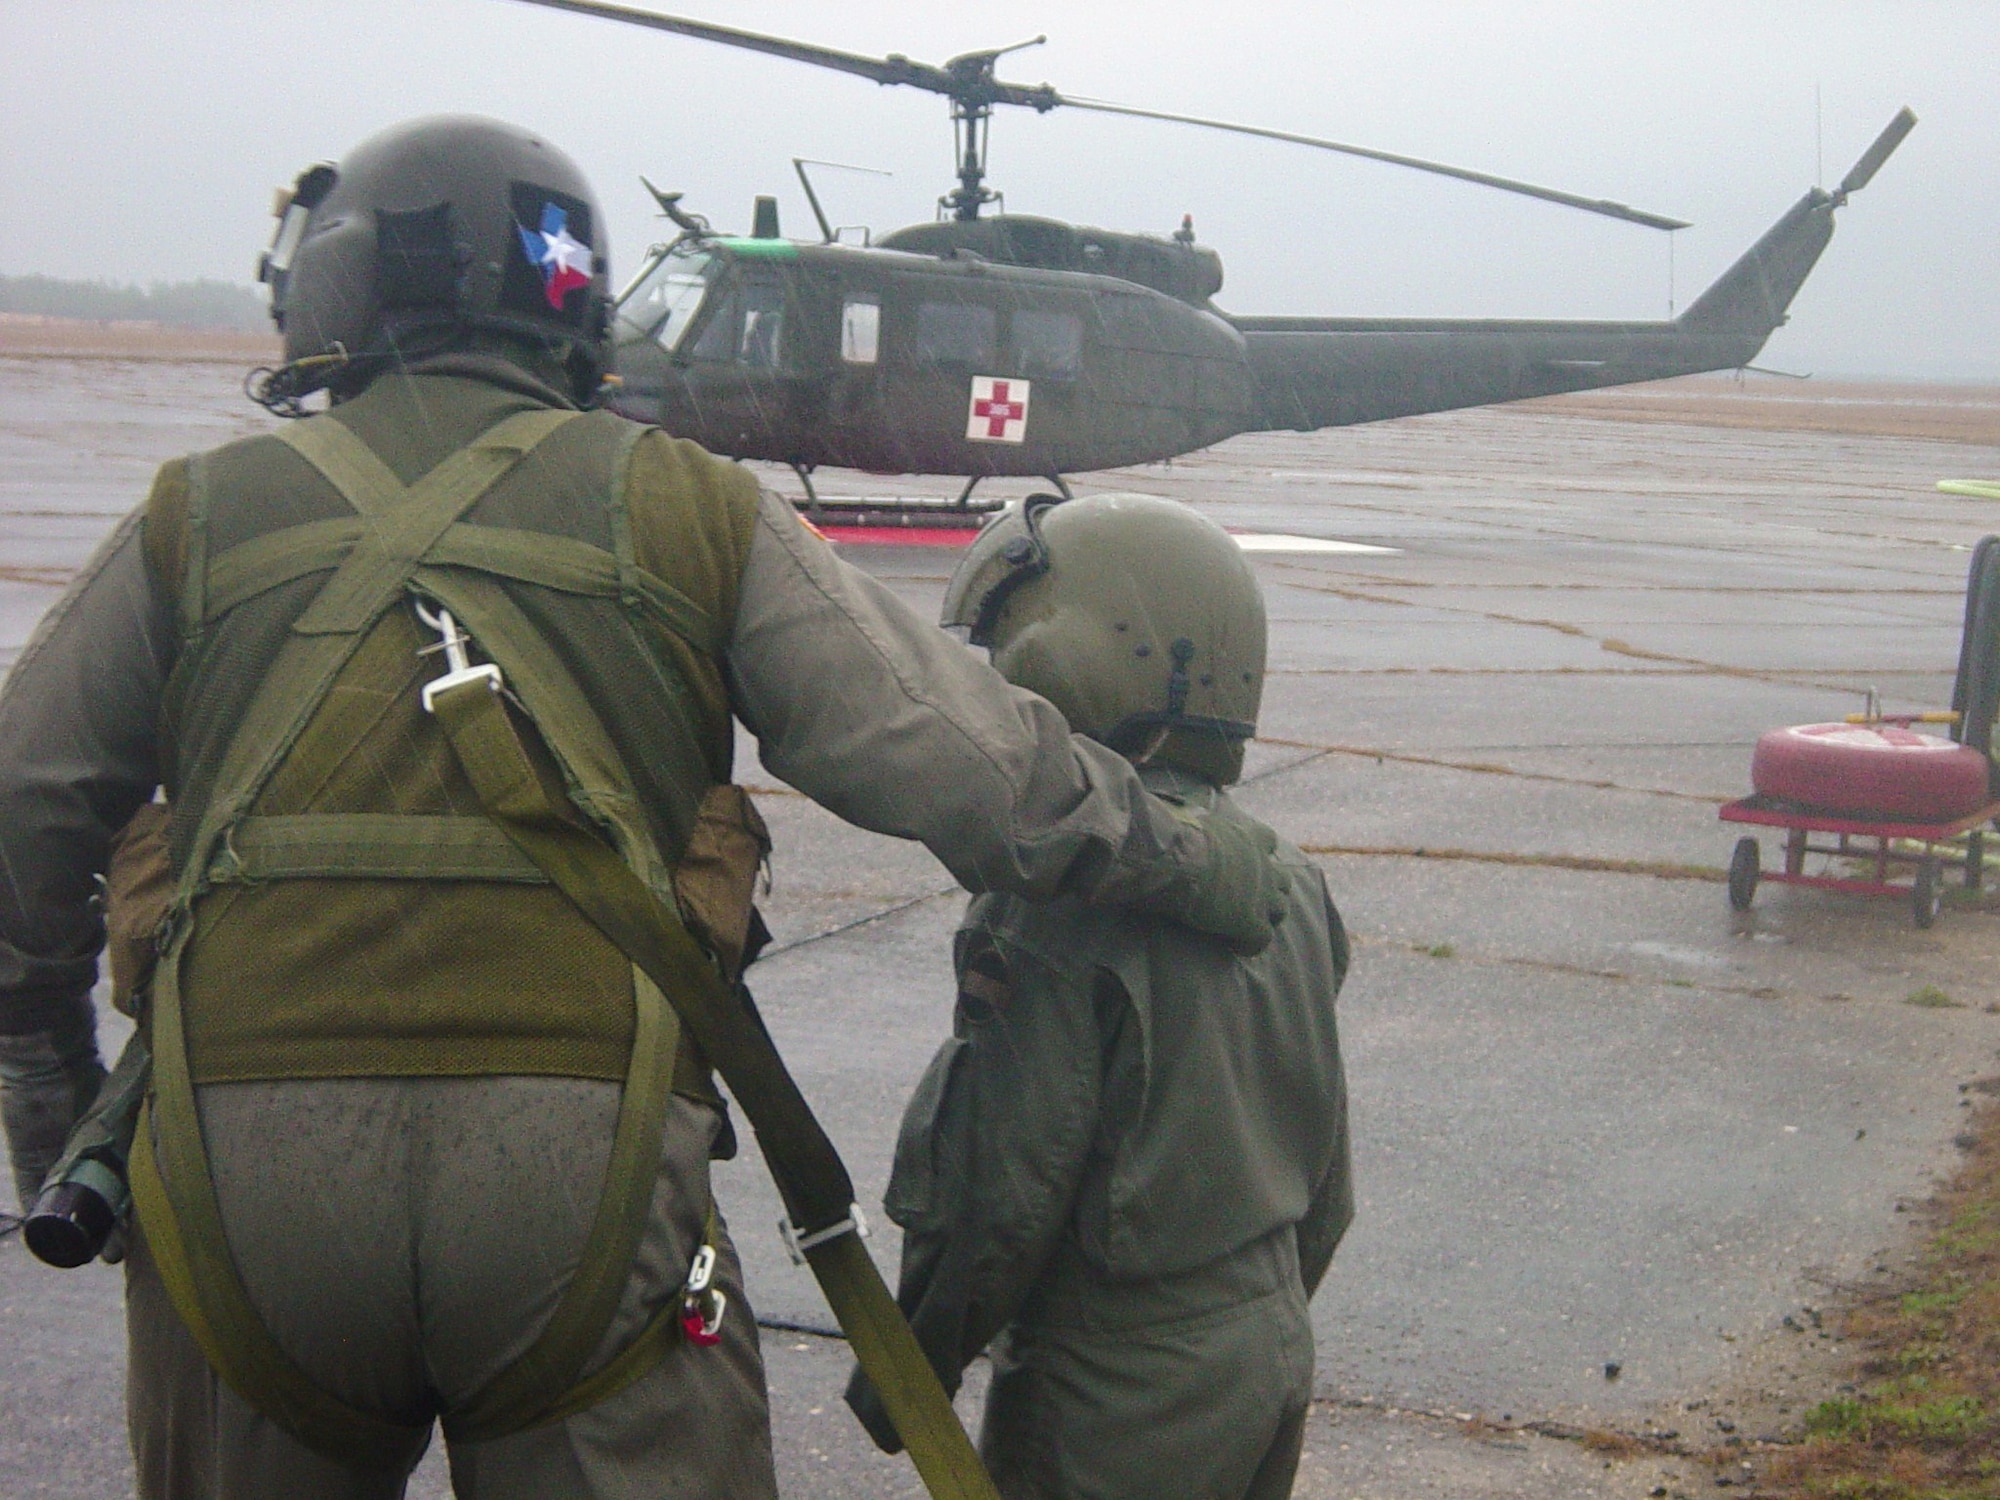 CAMP RUDDER, Fla. -- Riley Woina, 14, from Connecticut, runs through the rain with an air crew member of the 5th Aviation Battalion, Air Ambulance Detachment, Ft. Polk, La., to board a UH-1V Huey helicopter Feb. 21. Riley diagnosed with cystic fibrosis, was granted a week with the 6th Ranger Training Battalion and Eglin Airmen through the Make-A-Wish Foundation Feb. 19-24. (U.S Army photo by Army Capt. Jeremiah Cordovano)